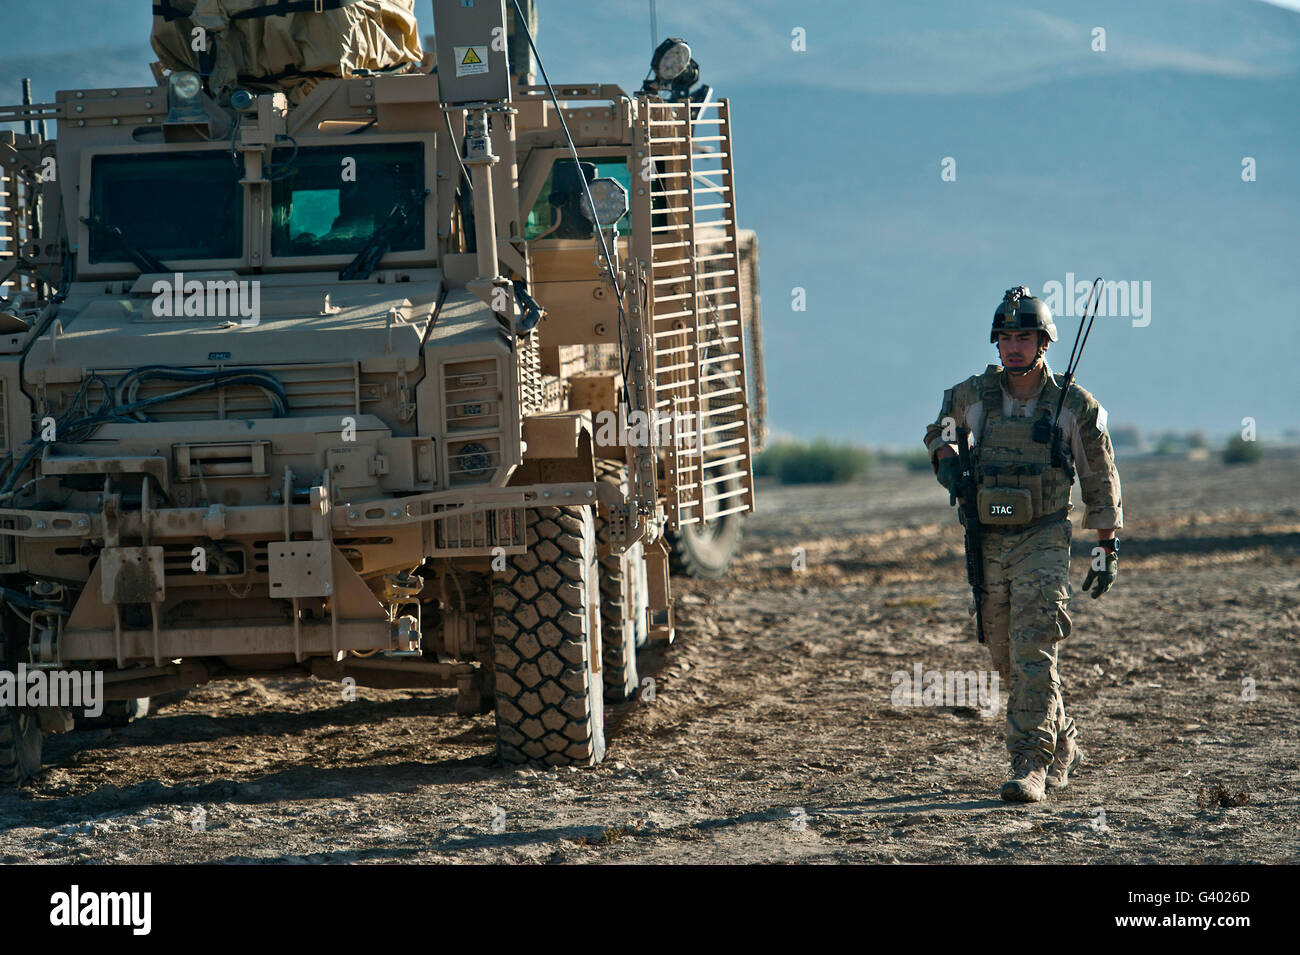 U.S. Air Force Joint Terminal Attack Controller walks past a MRAP vehicle while on patrol. Stock Photo